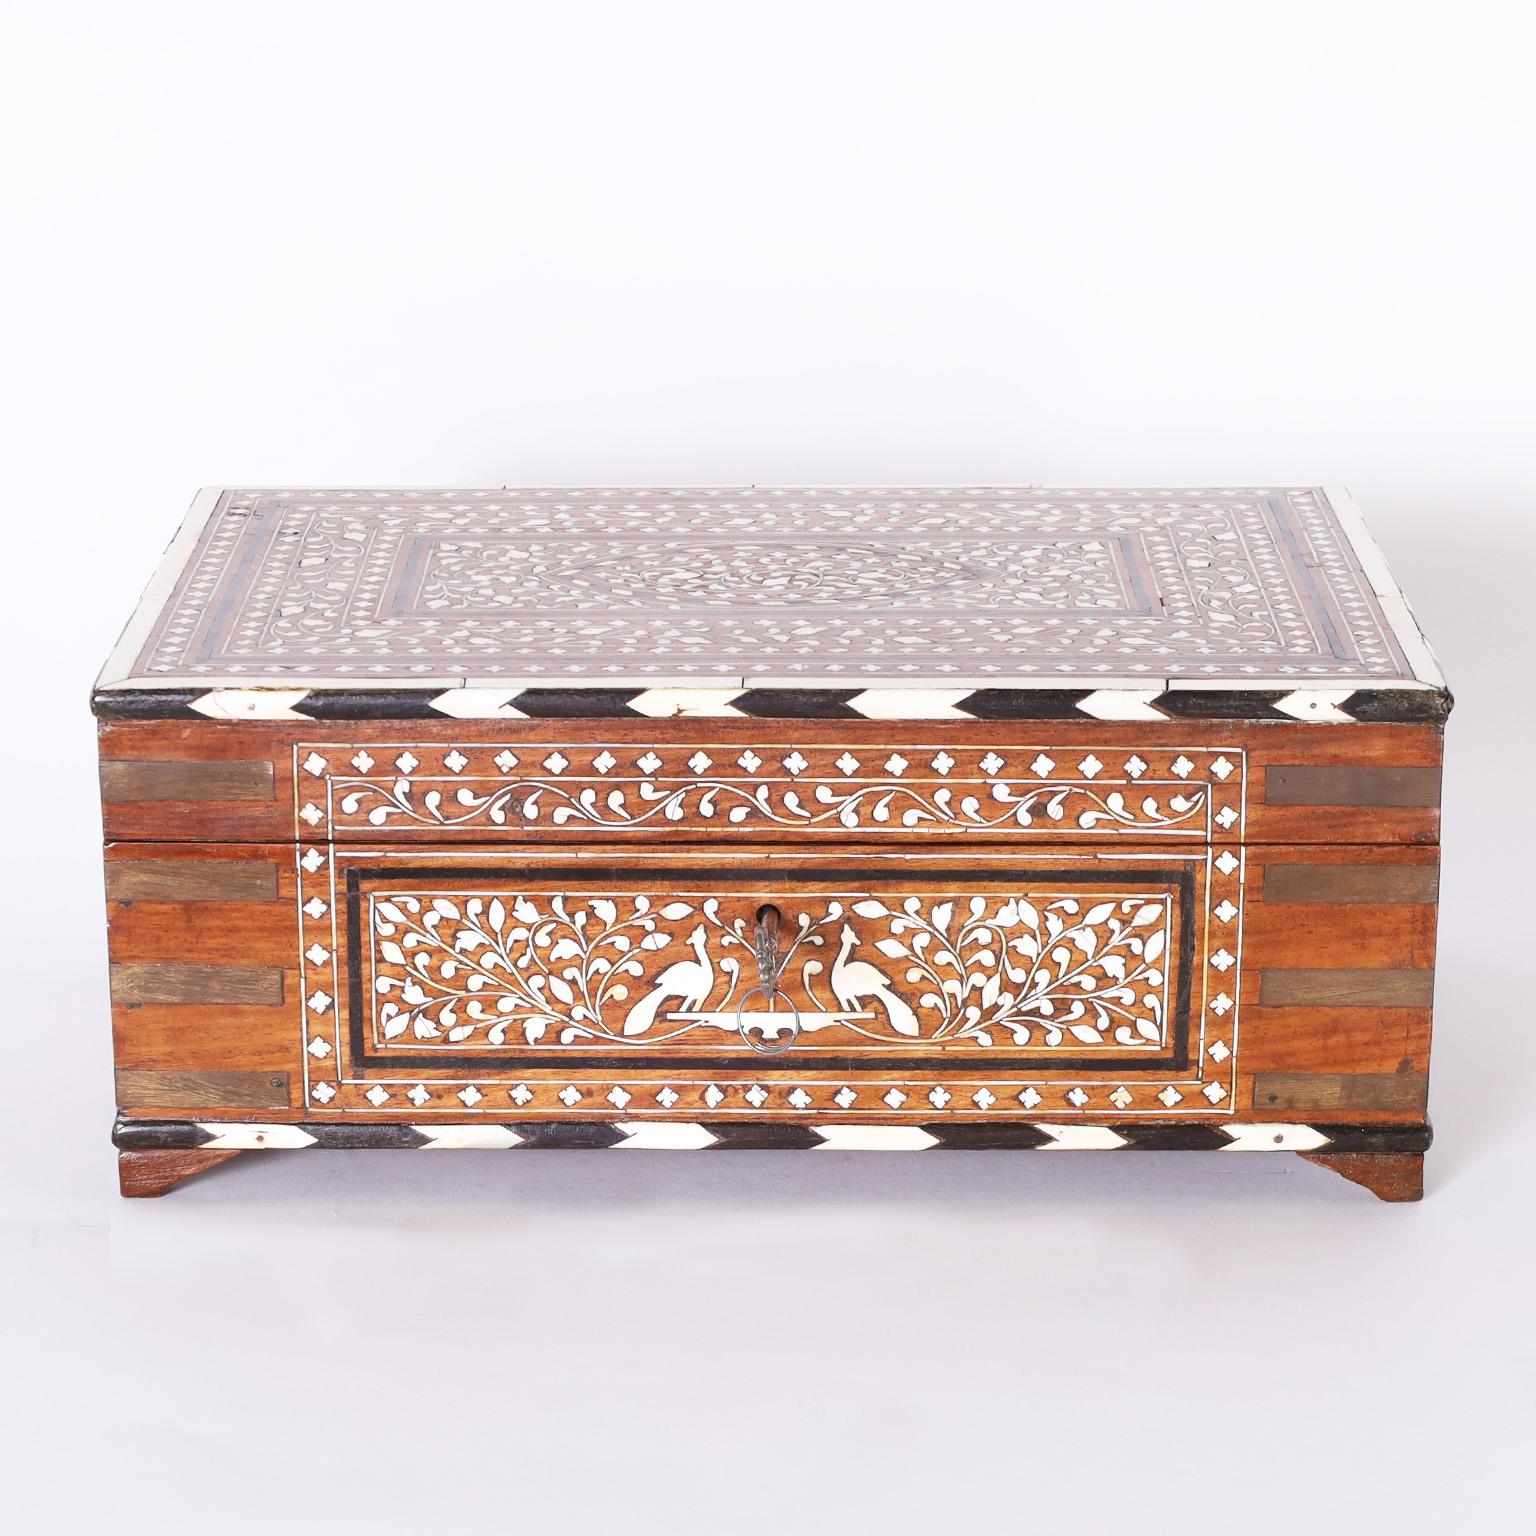 Antique Anglo Indian lidded box decorated with intricate floral and fauna bone inlays and Campaign style brass hardware. The inside has floral inlays with lidded and removable compartments.